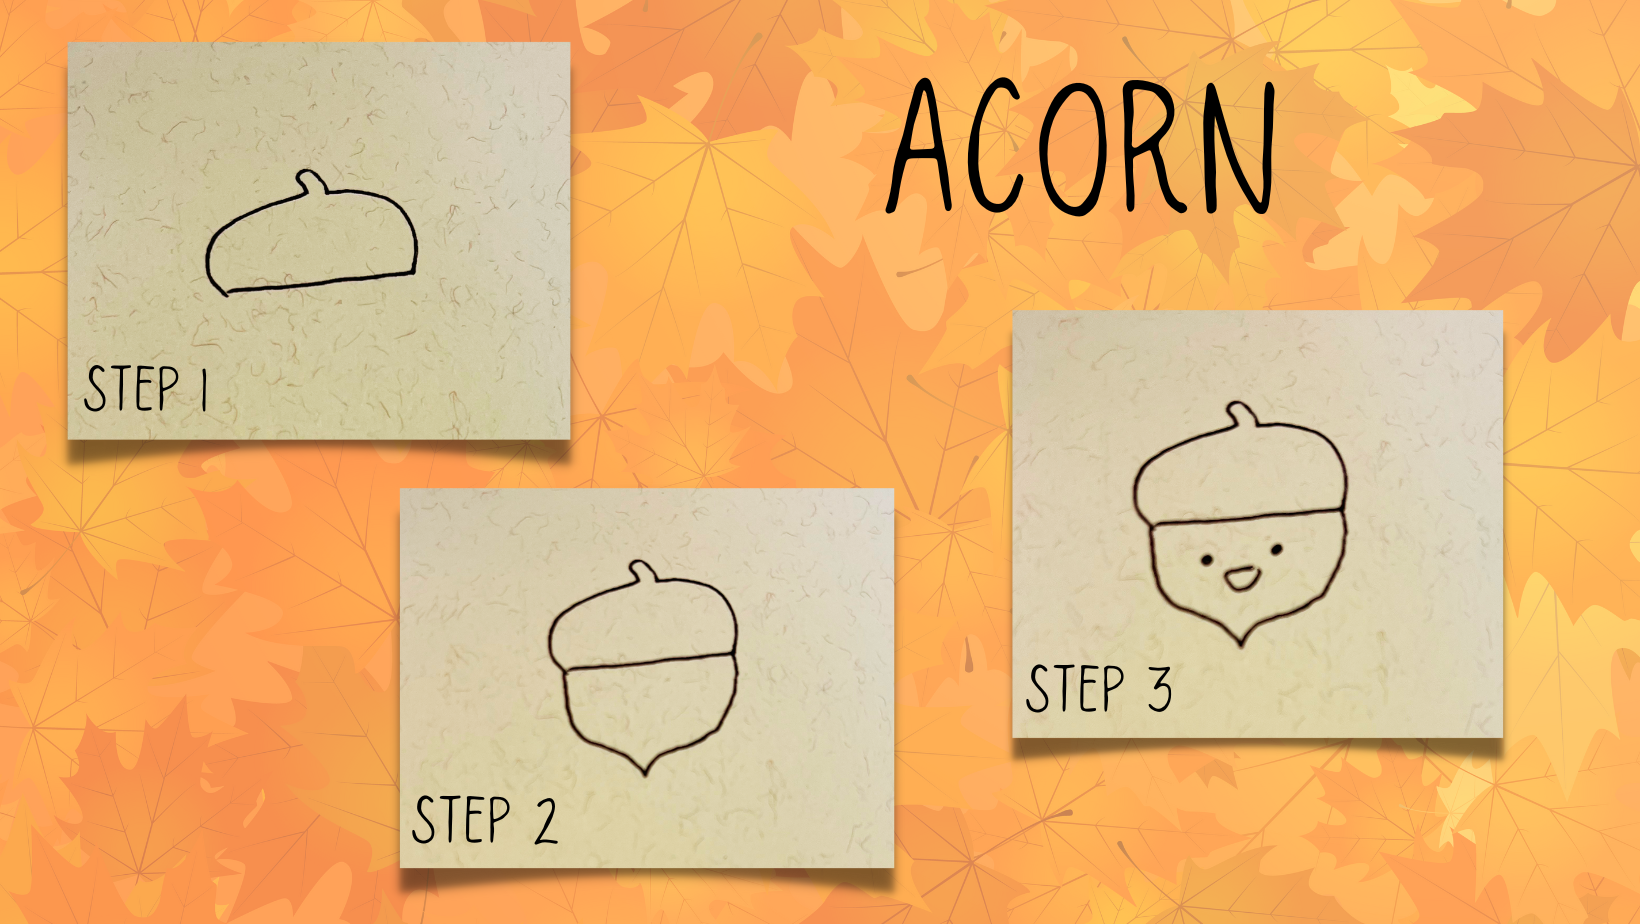 Three steps for drawing an acorn